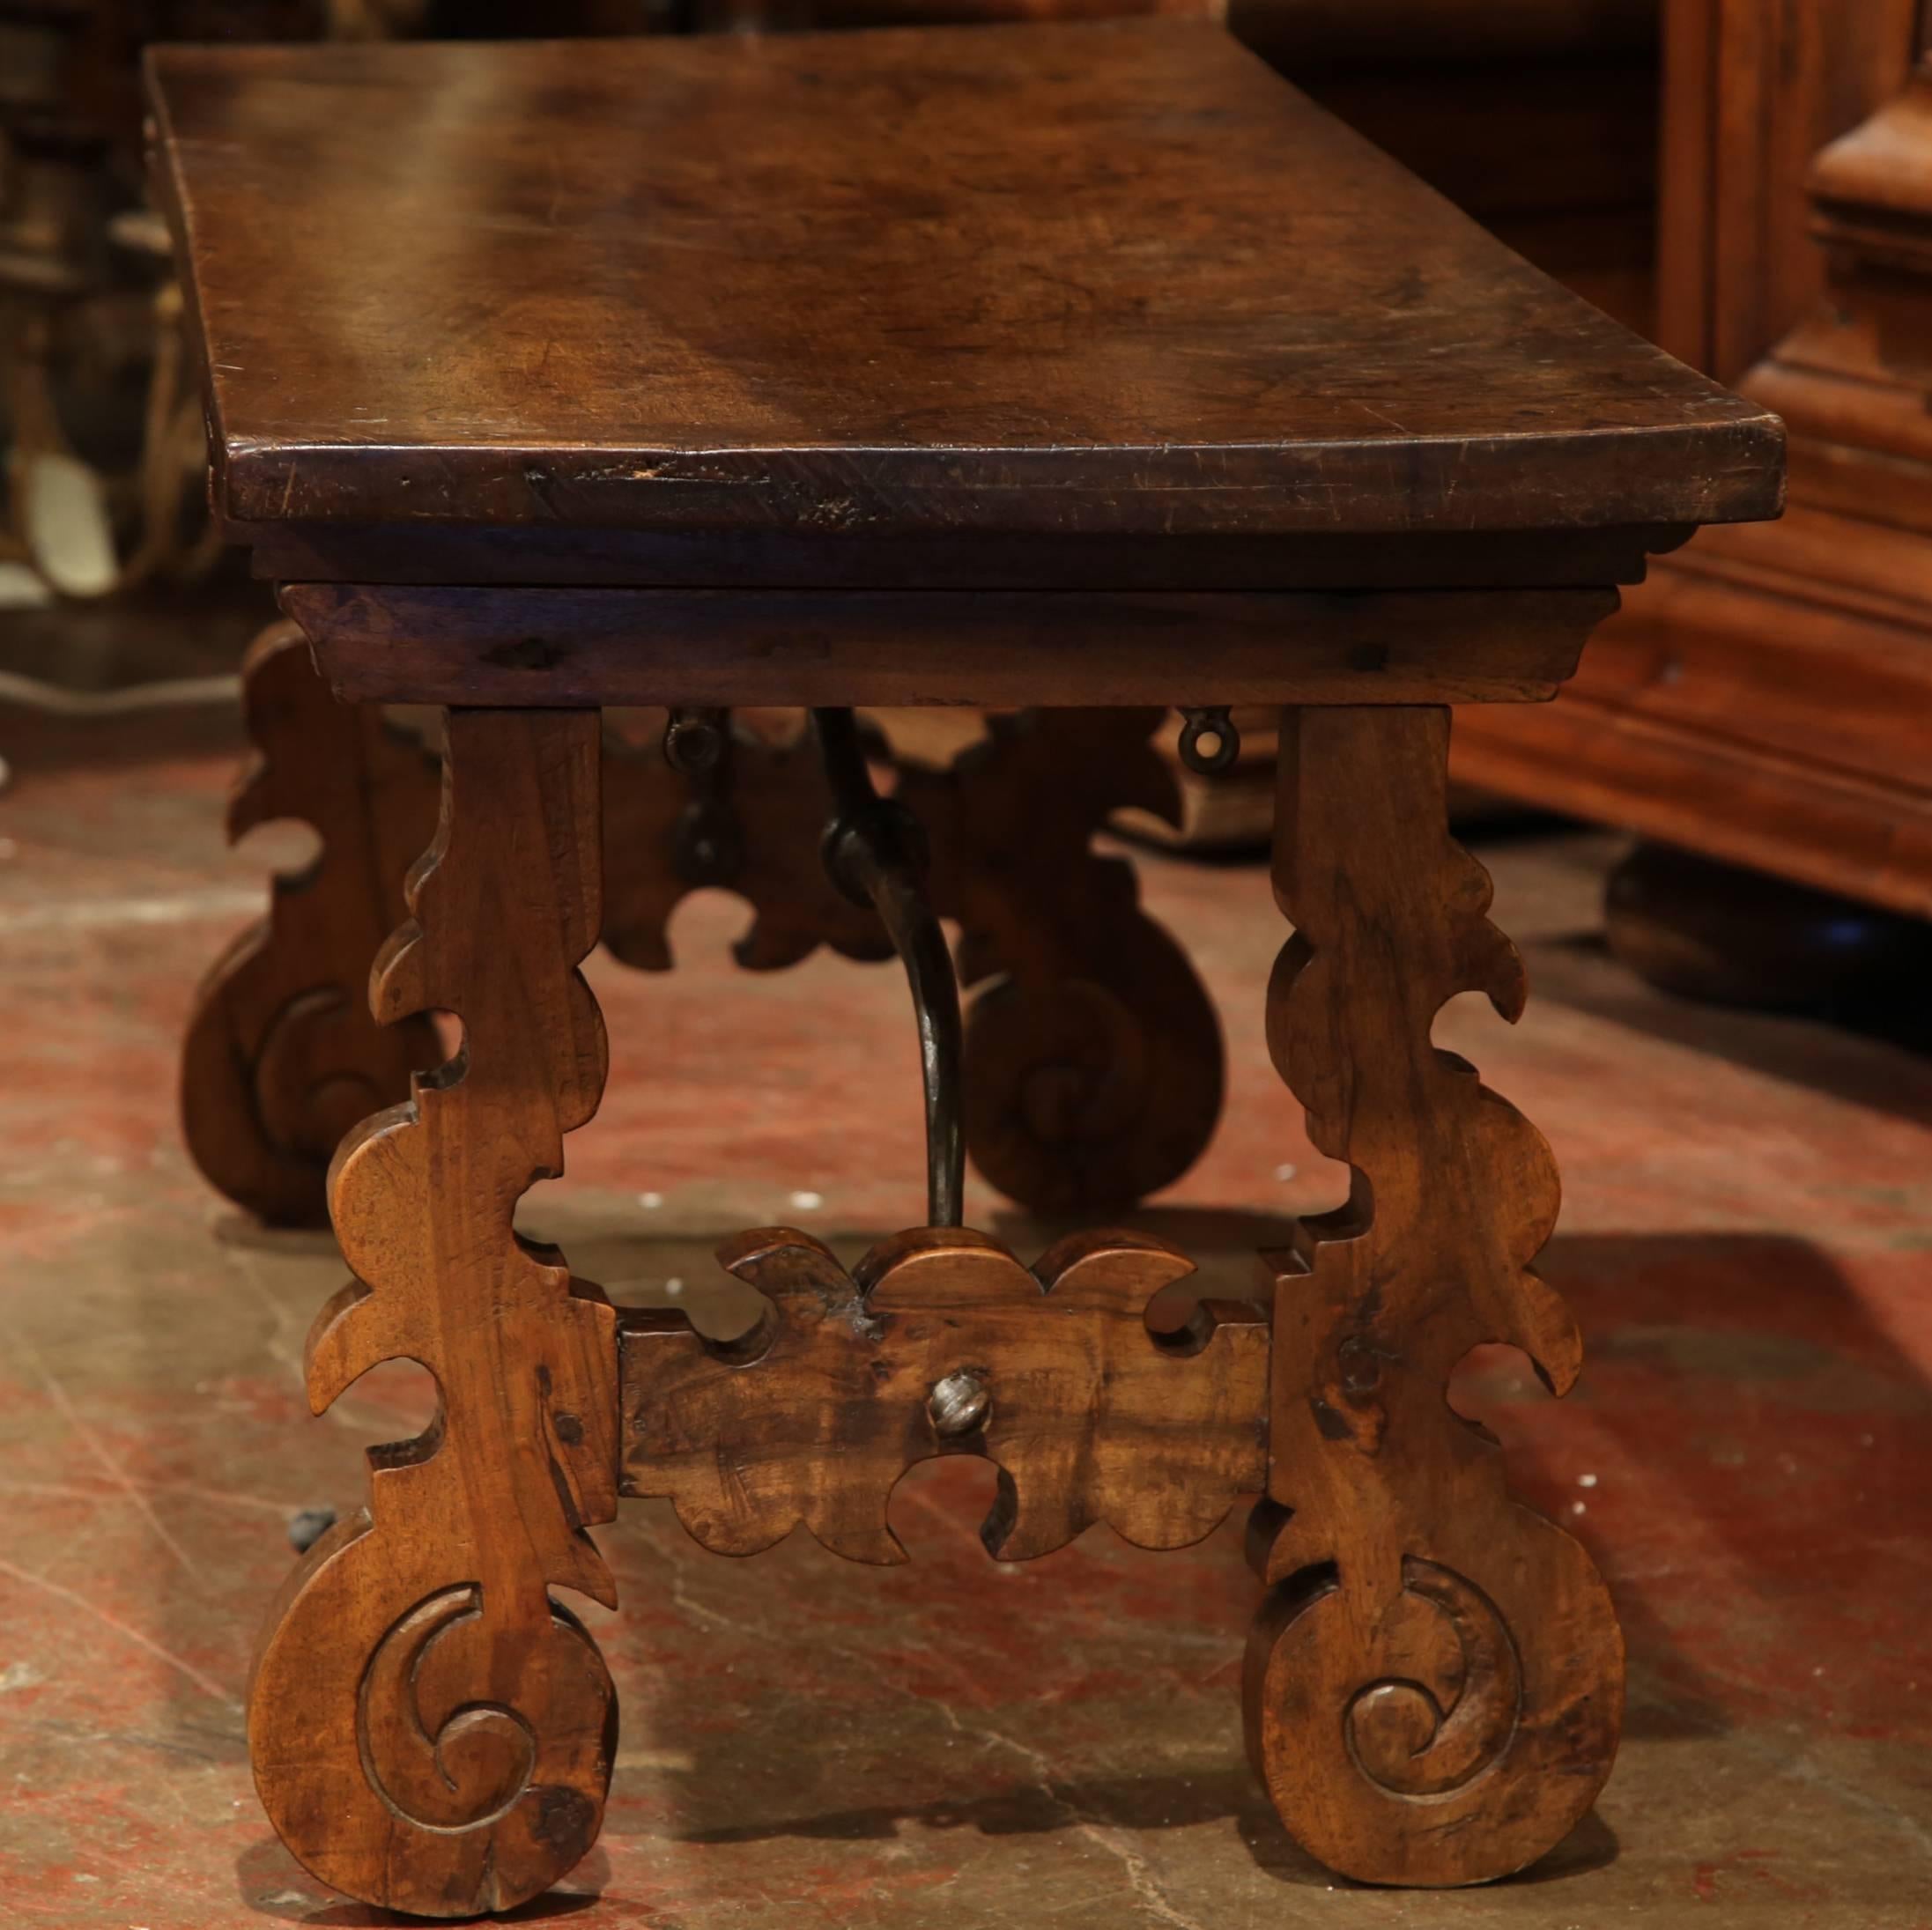 Hand-Carved 19th Century, Spanish Carved Walnut Coffee Table with Wrought Iron Stretcher